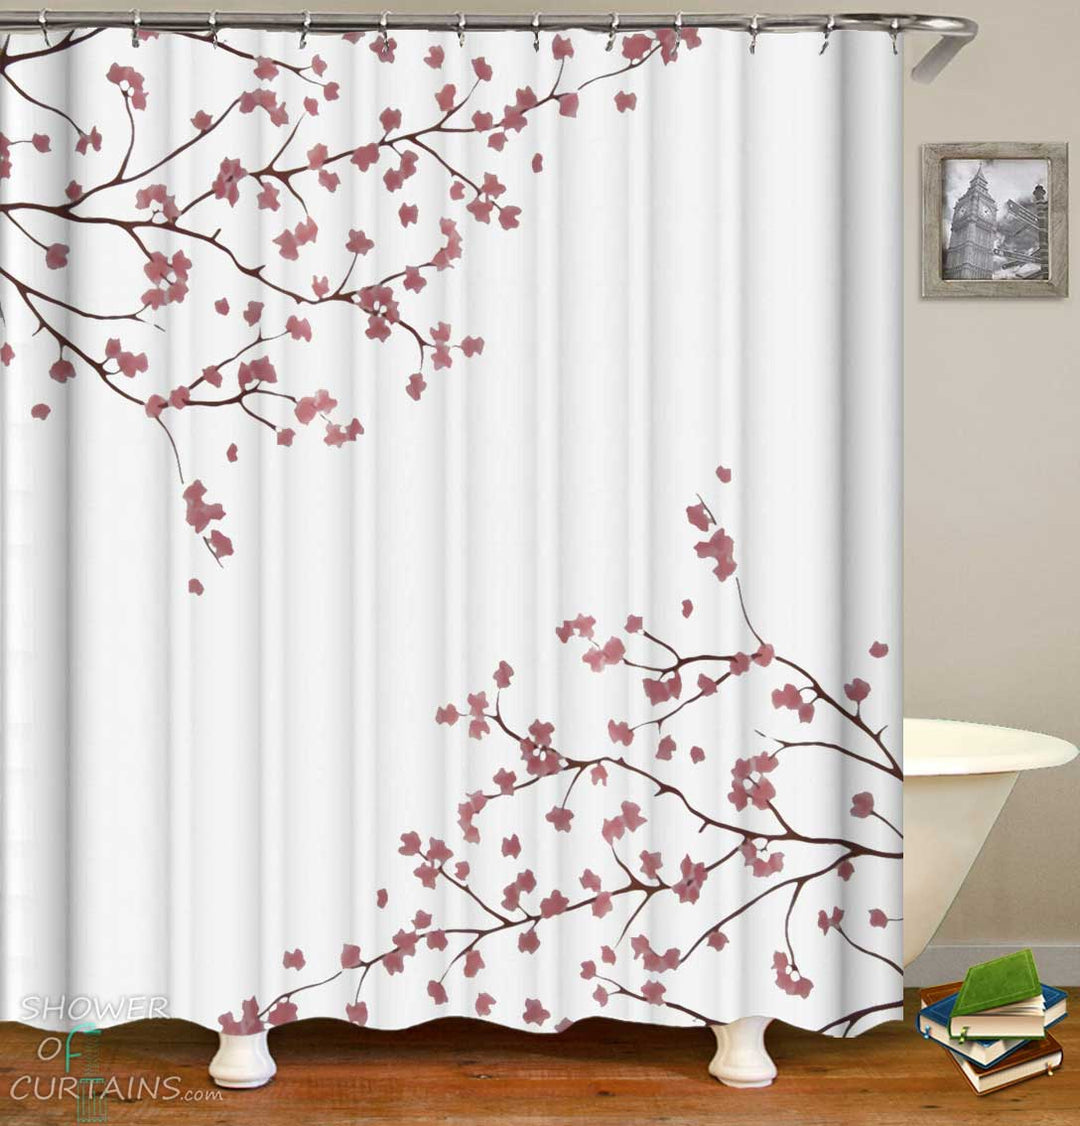 Shower Curtains with Modest Cherry Blossom